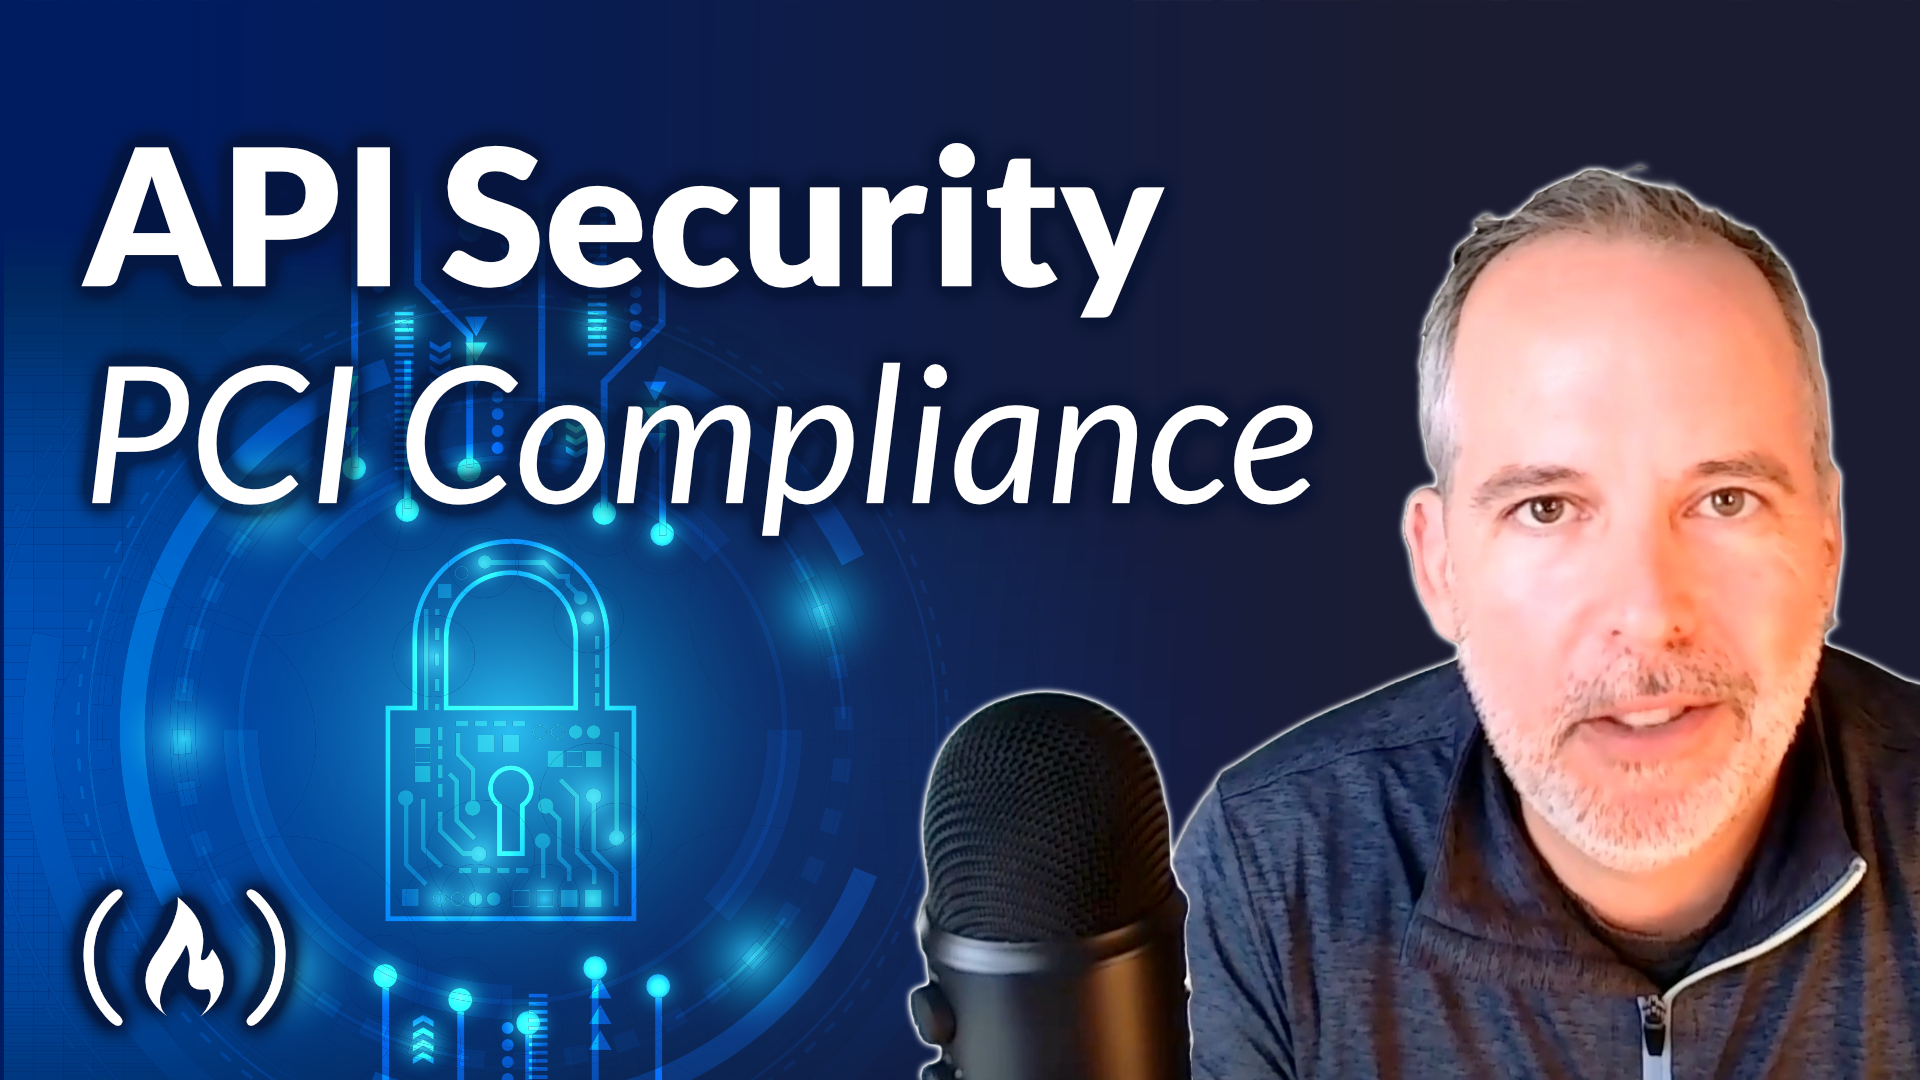 API Security for PCI Compliance (DSS 4.0)